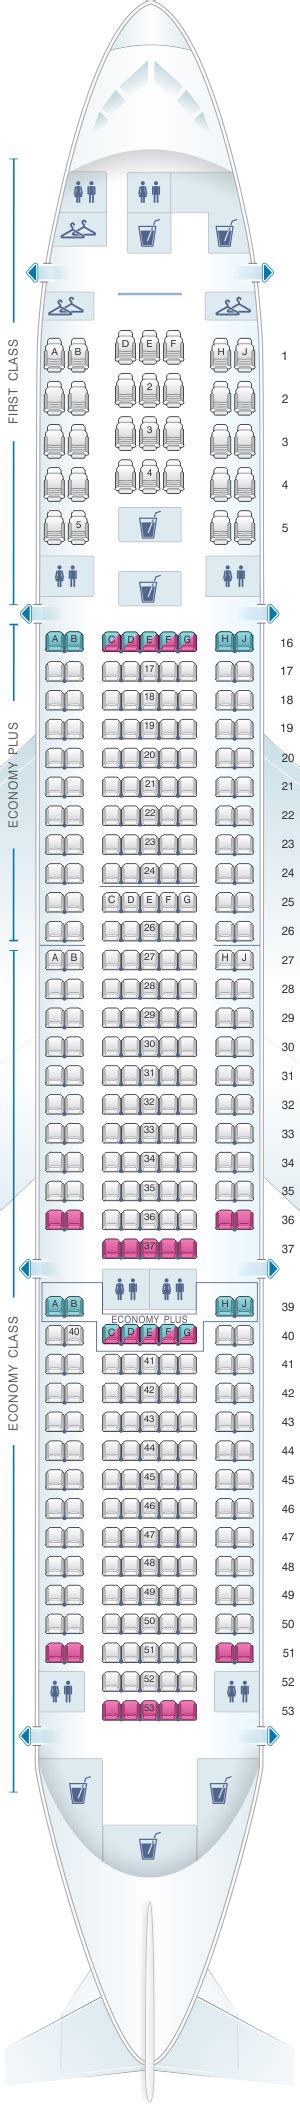 The seat map of this United Airlines 777-200 is configured wit